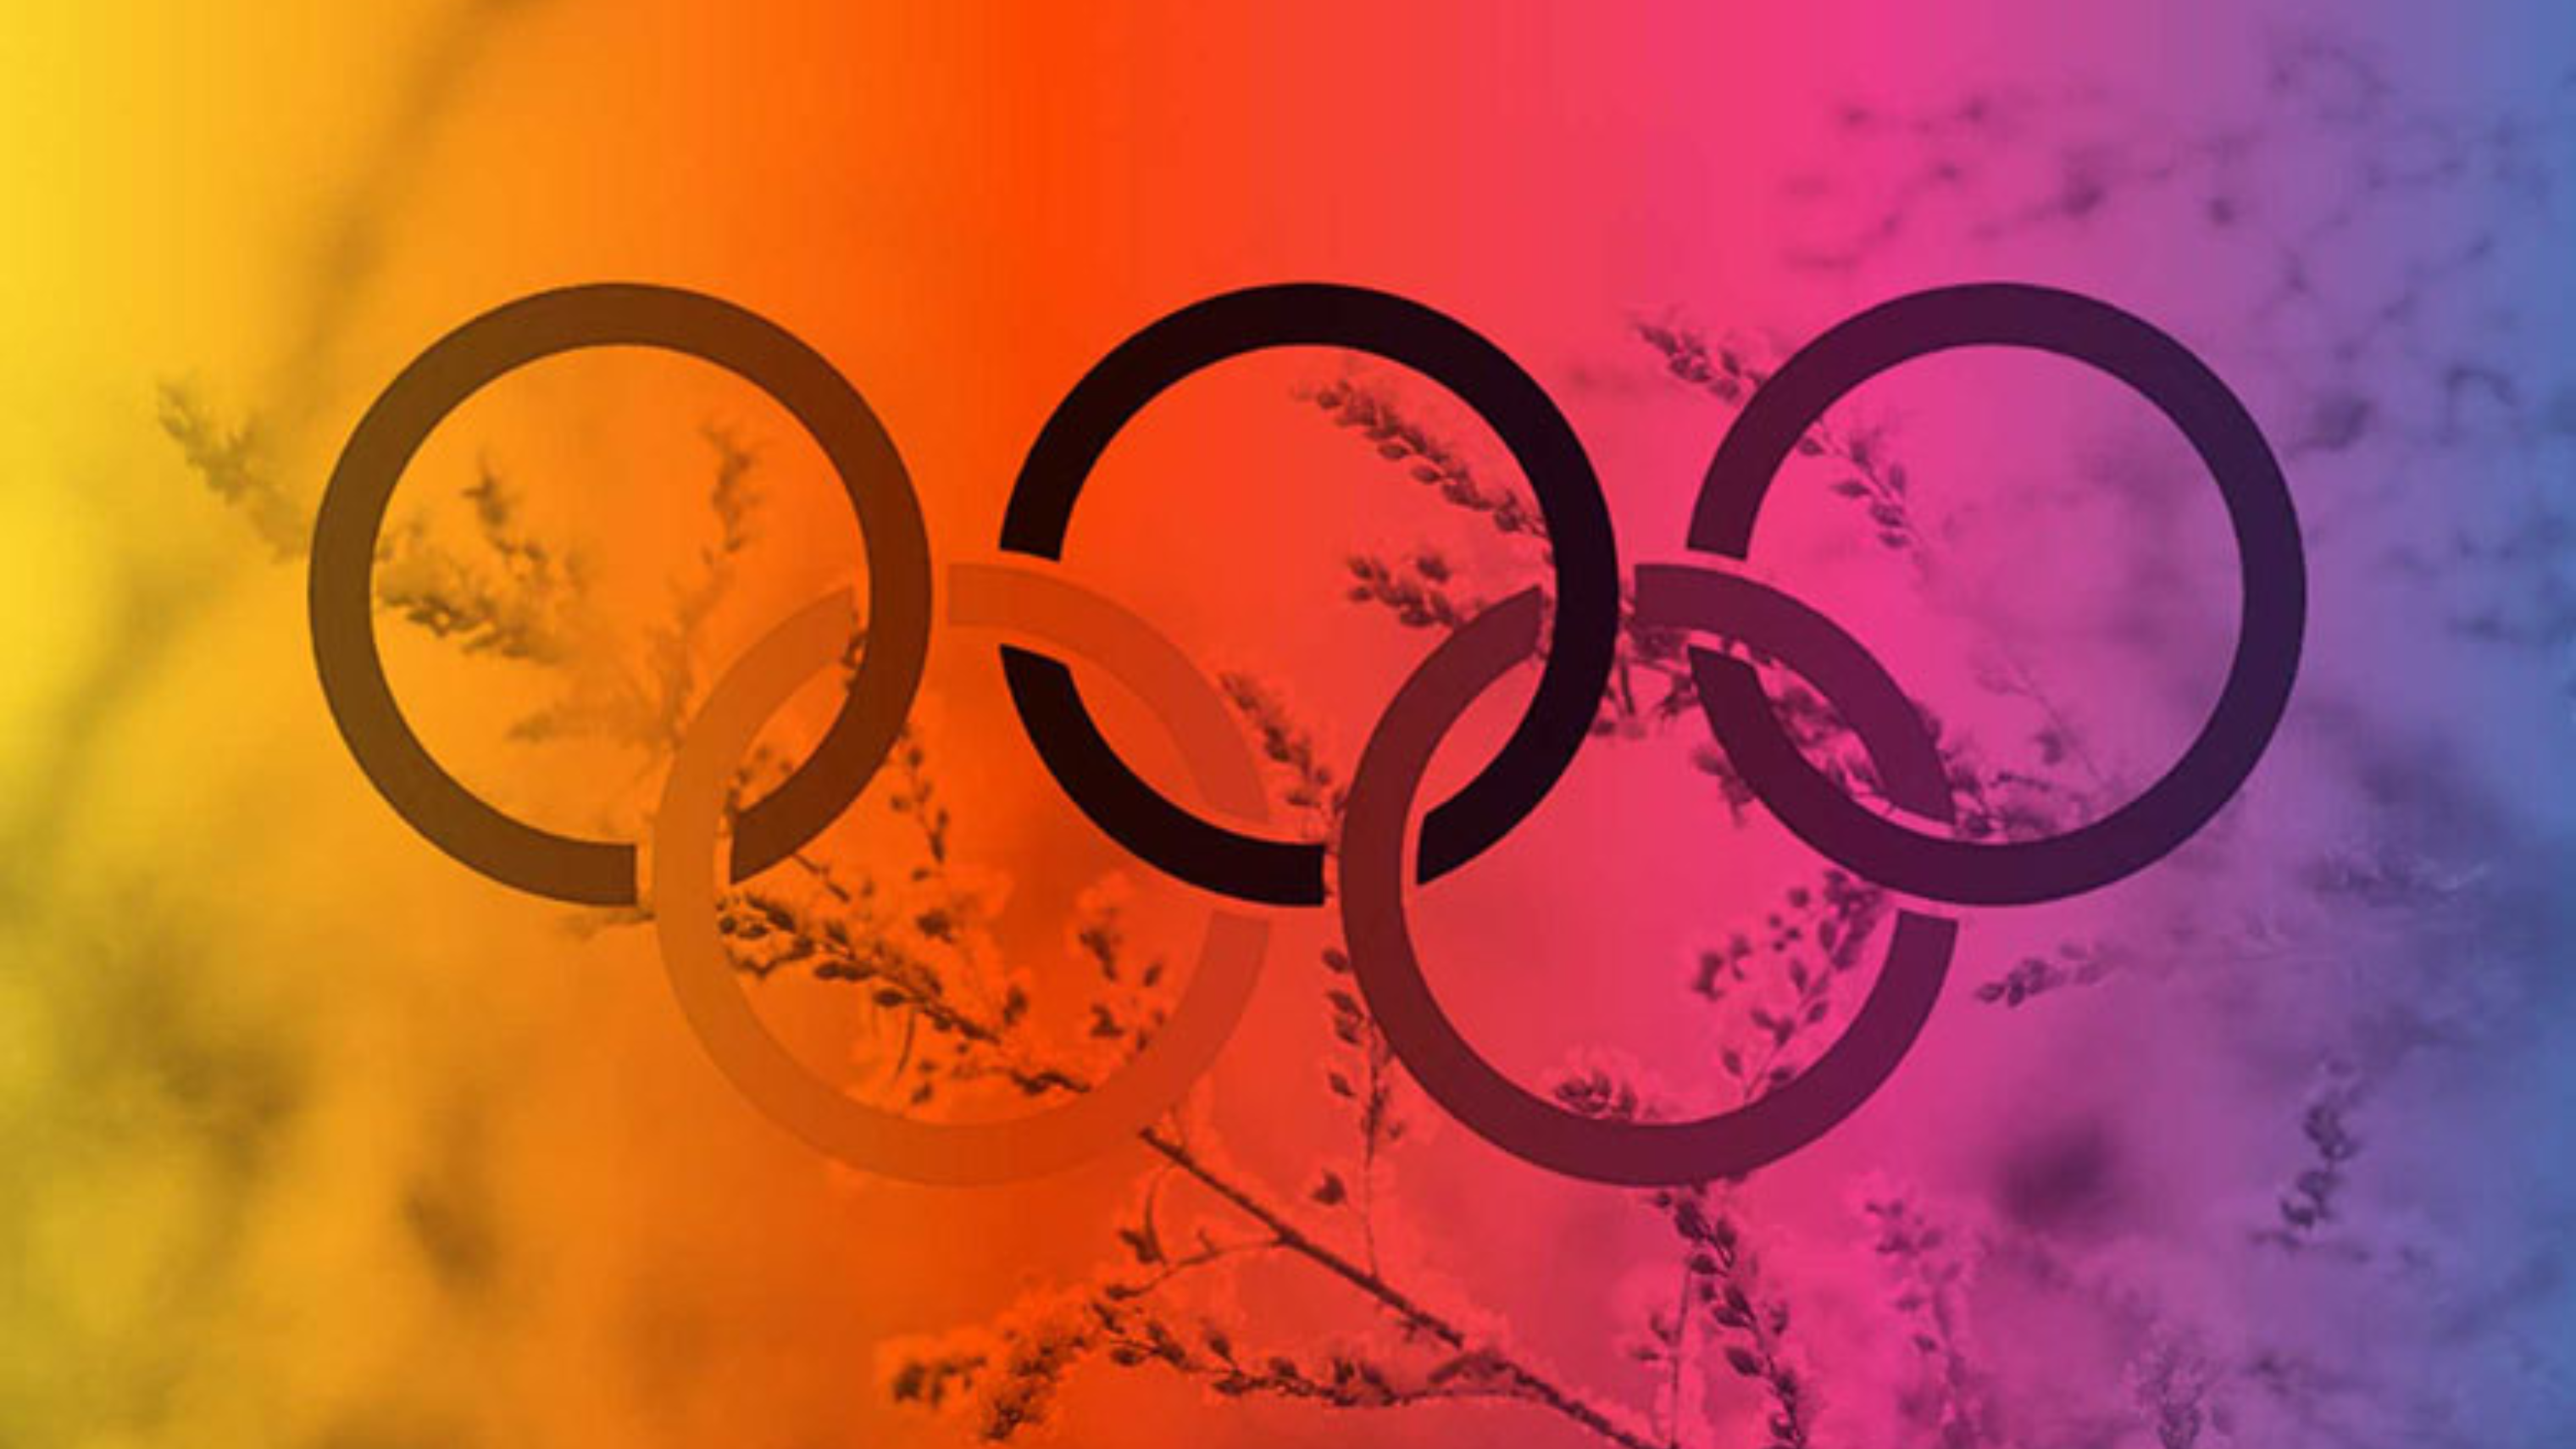 5 IN 1 WINTER OLYMPICS EXPERIENCES